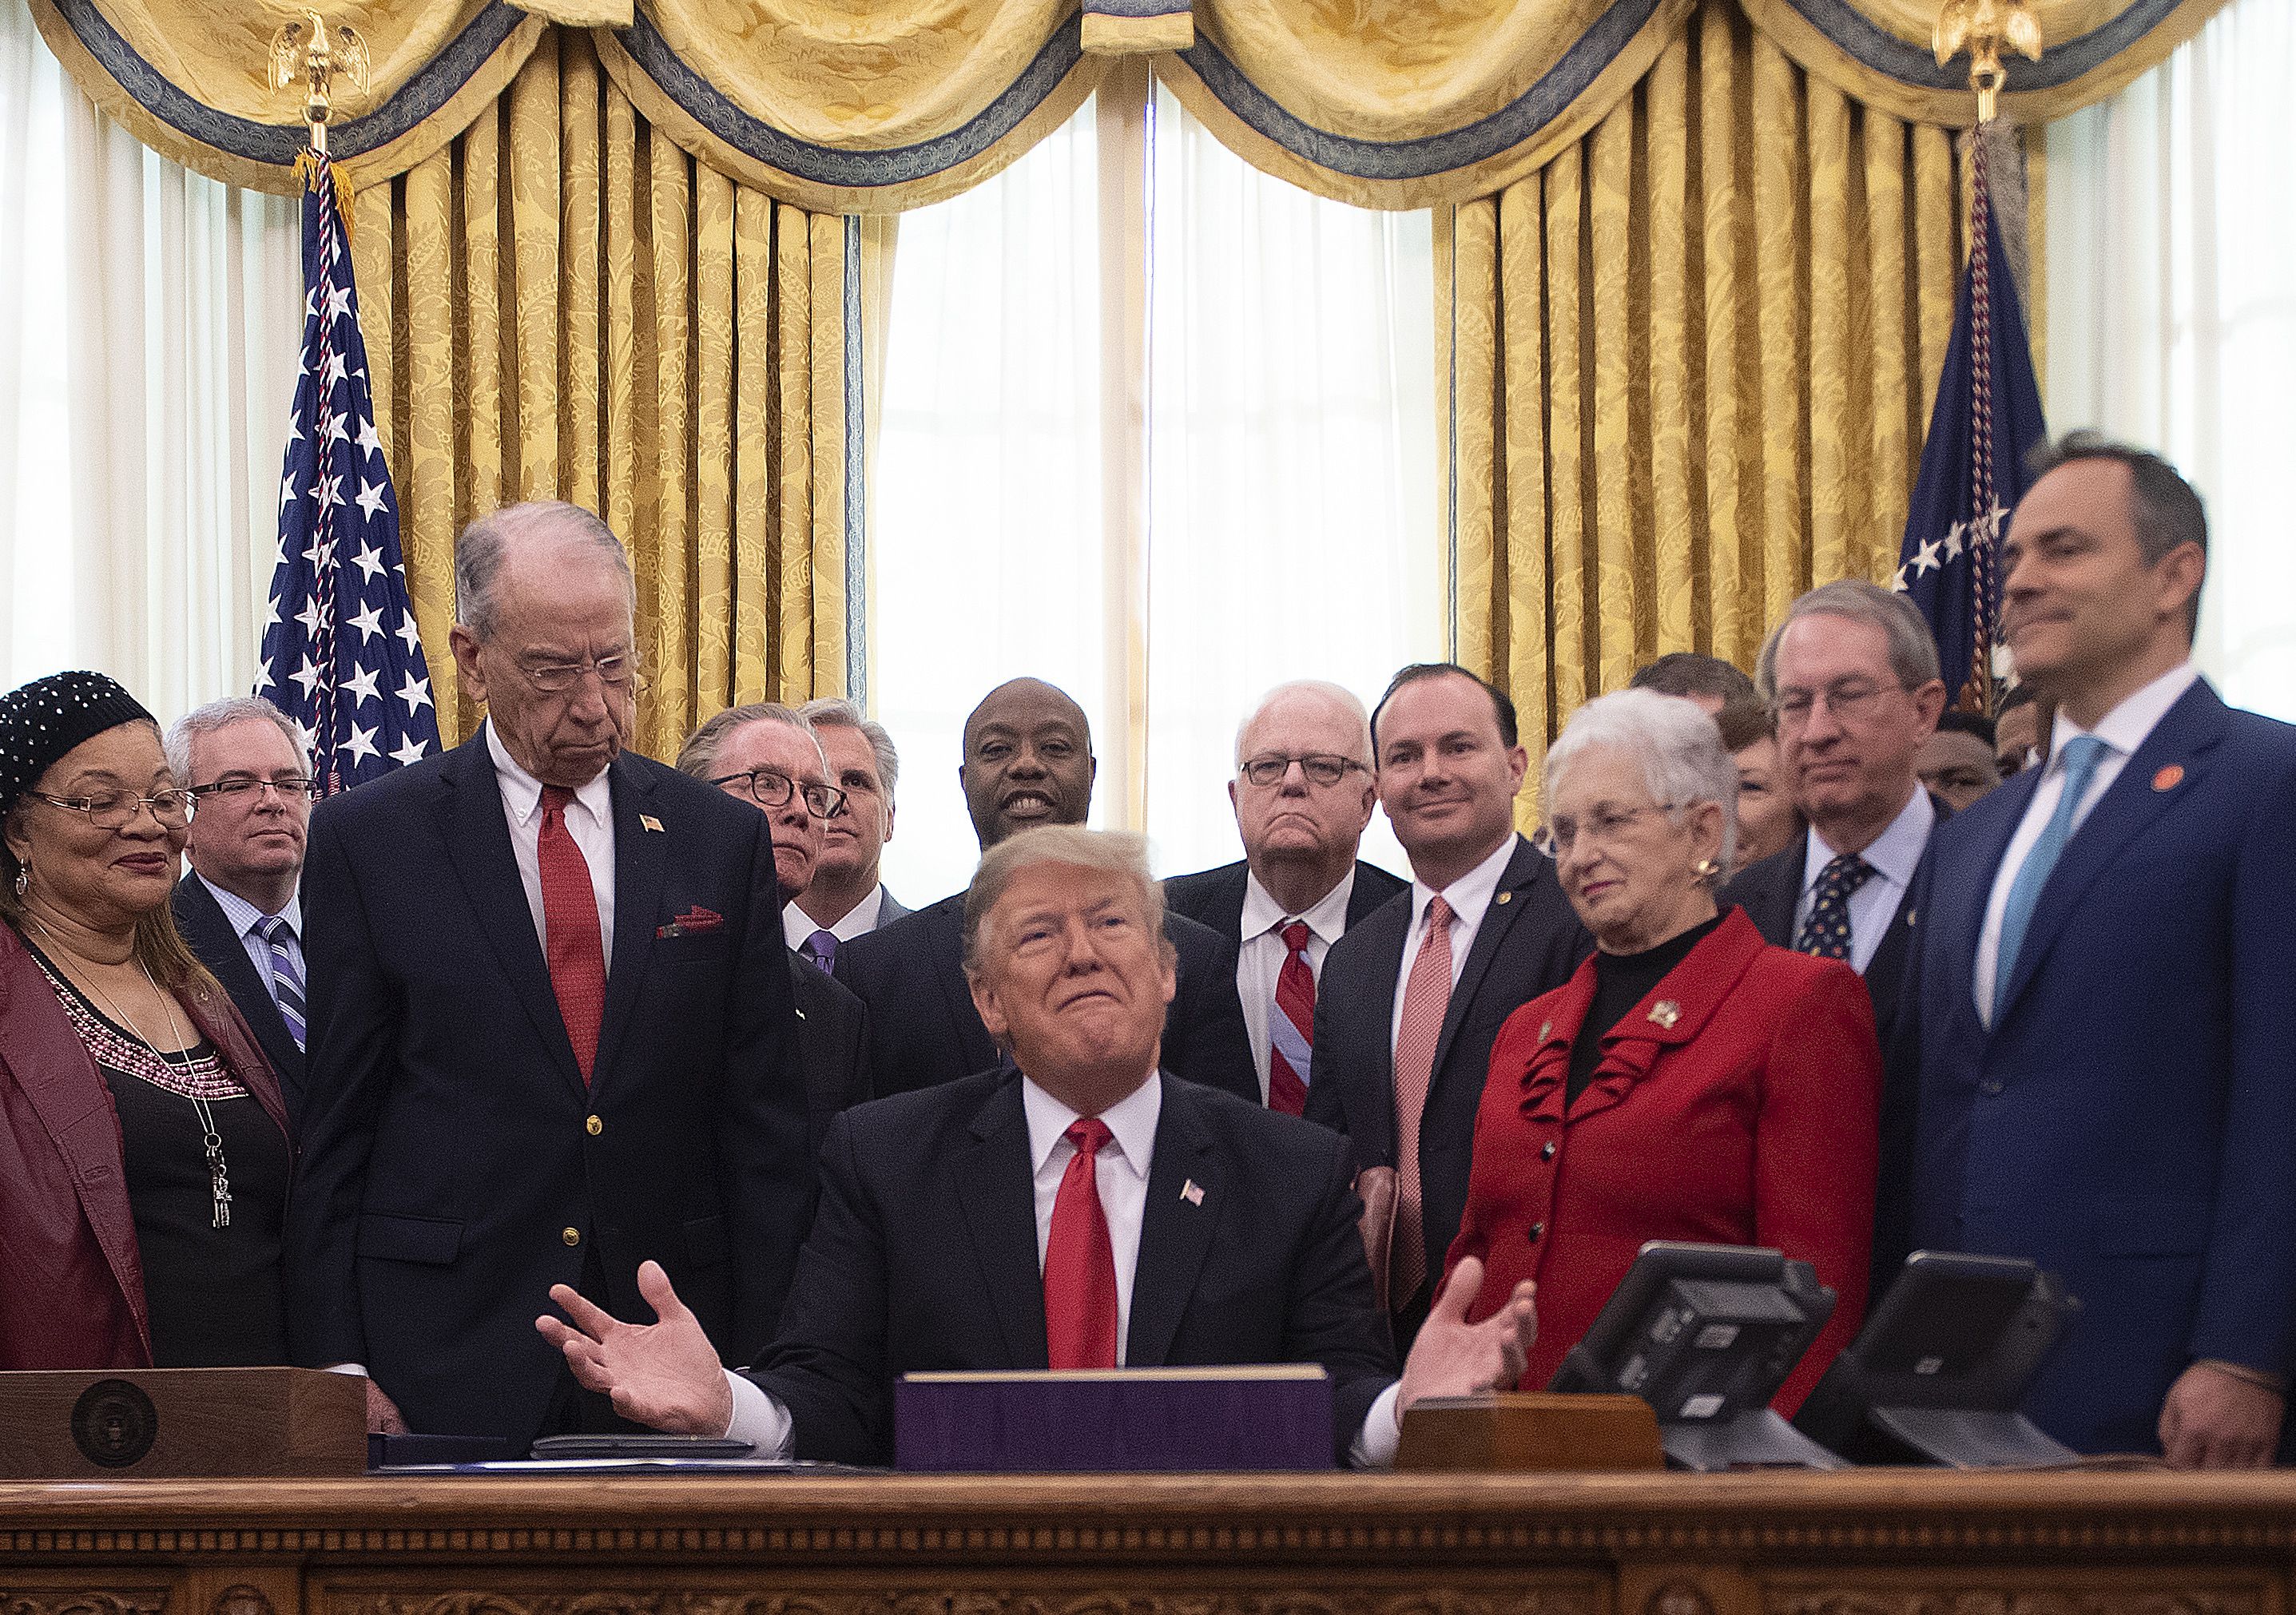 Then-President Donald Trump signs the First Step Act into law on 21 December, 2018.